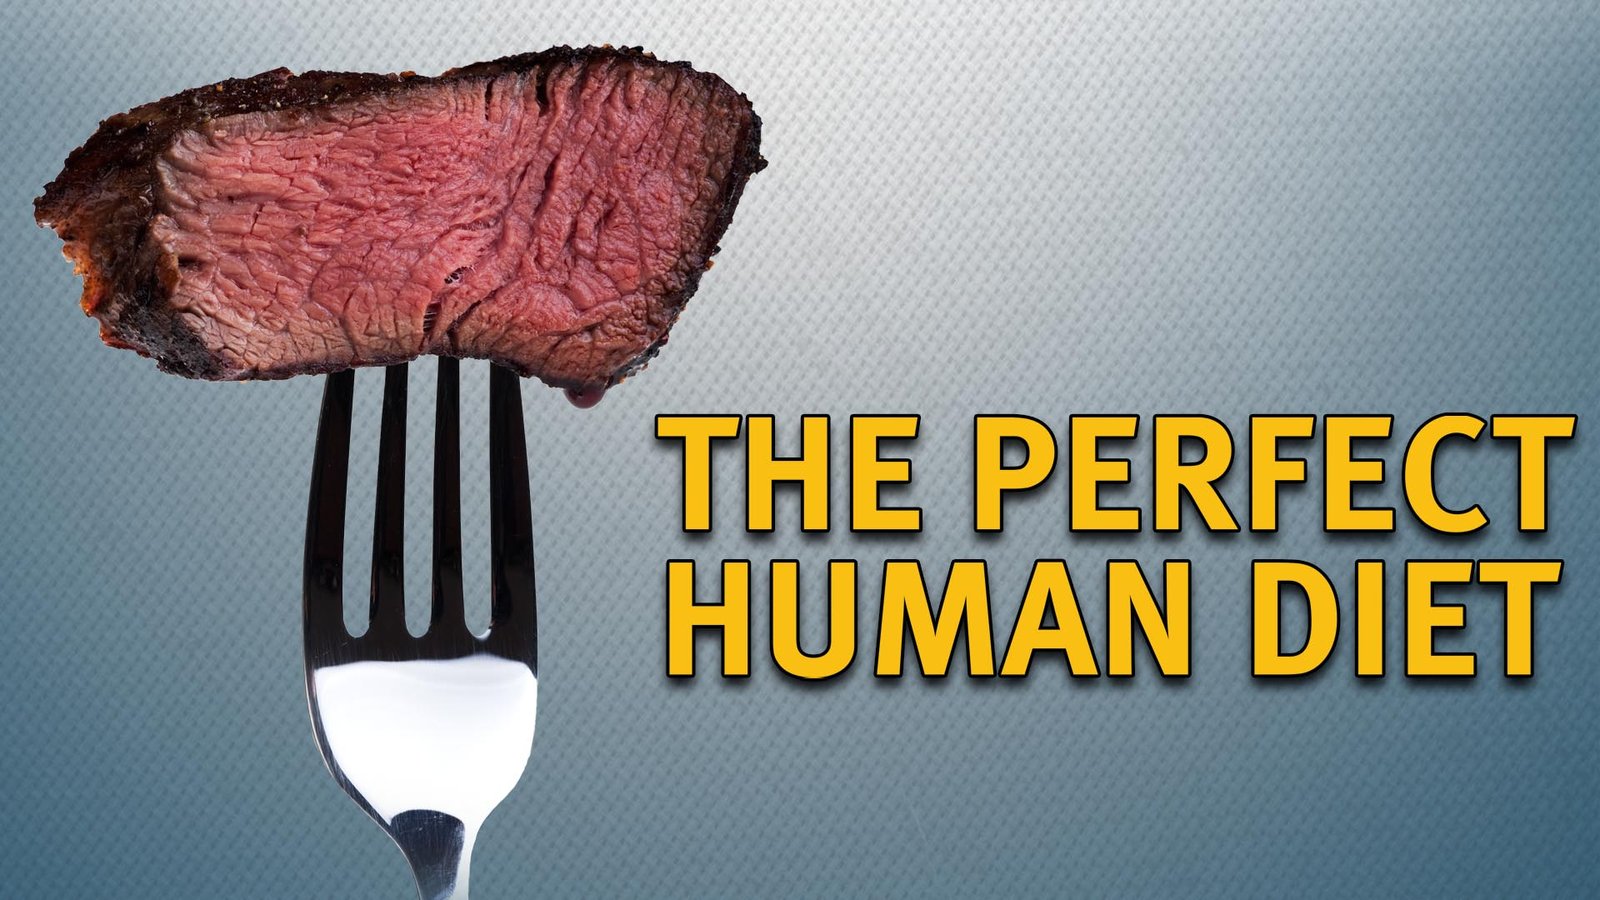 Perfect Human Diet - A Scientific and Historical Investigation of the Benefits of the Paleo Diet